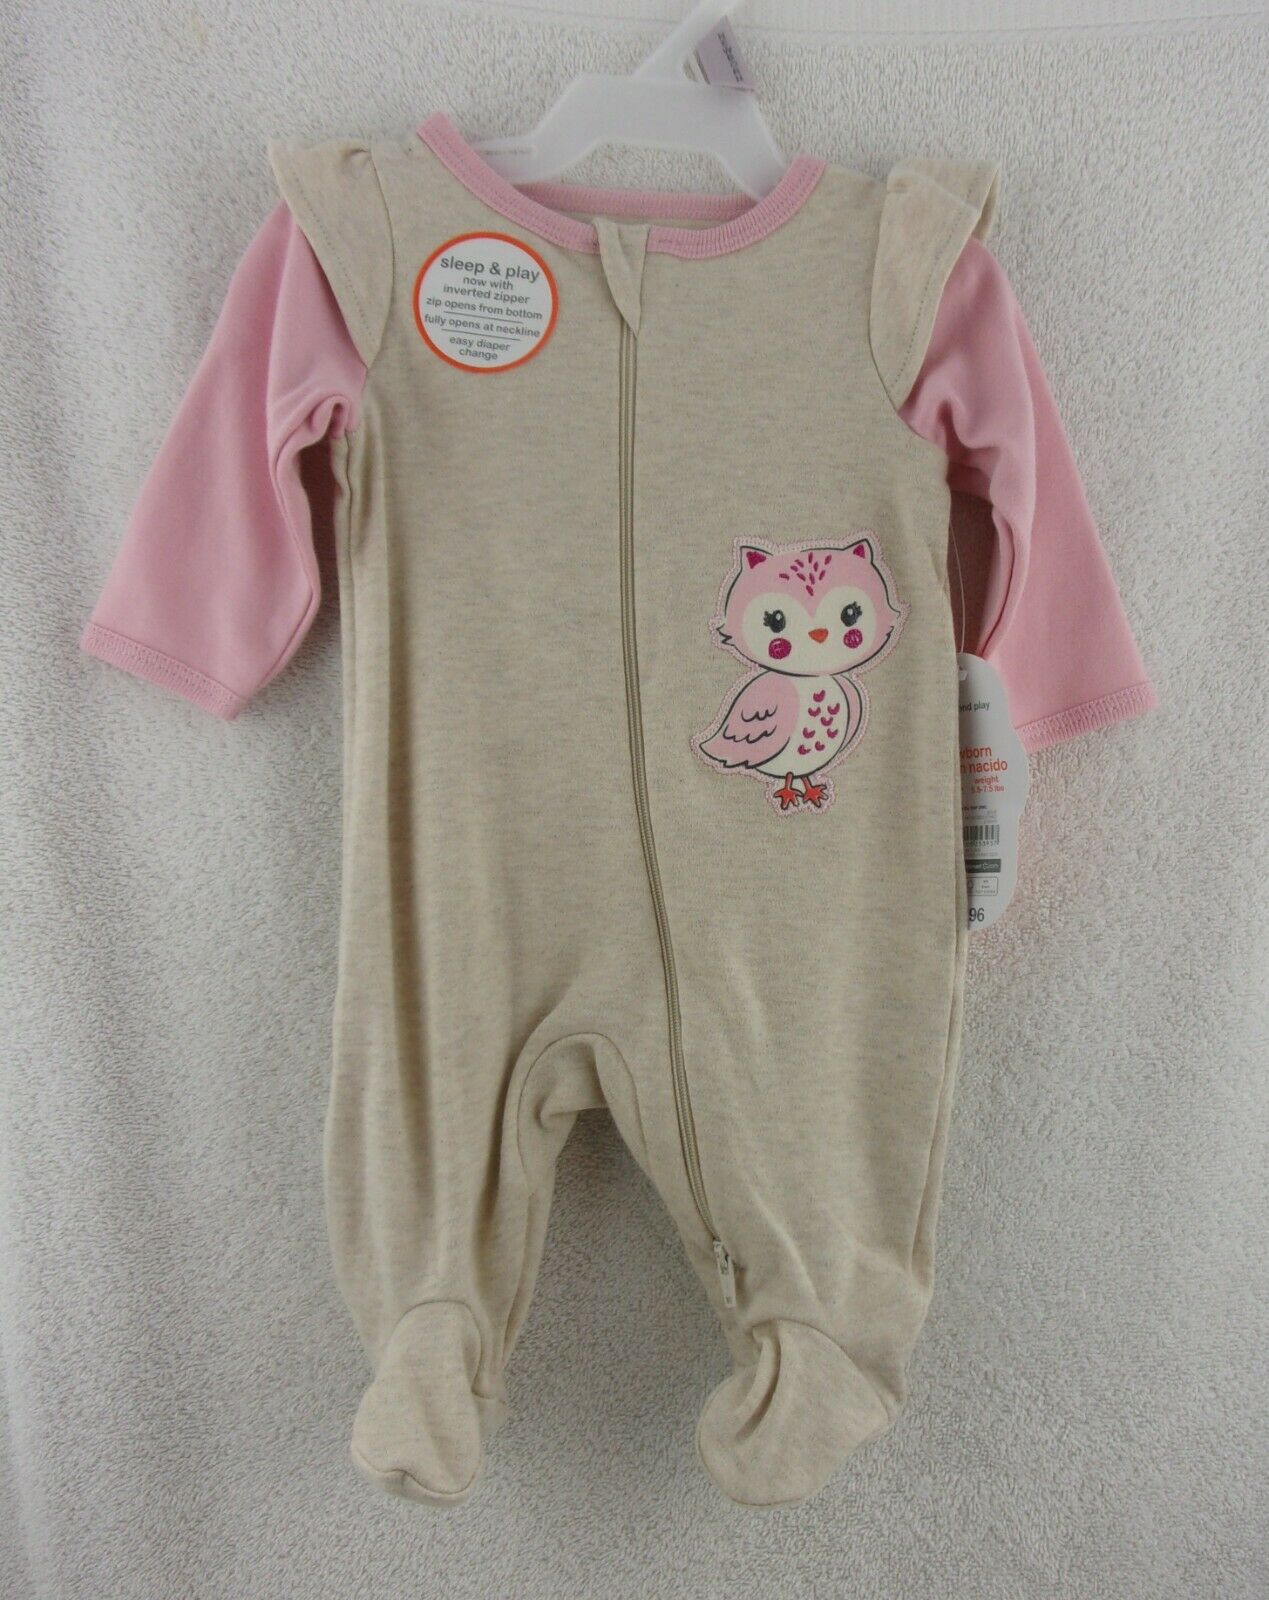 Doll Clothes Wonder Nation Owl Sleeper Newborn Infant Outfit 20